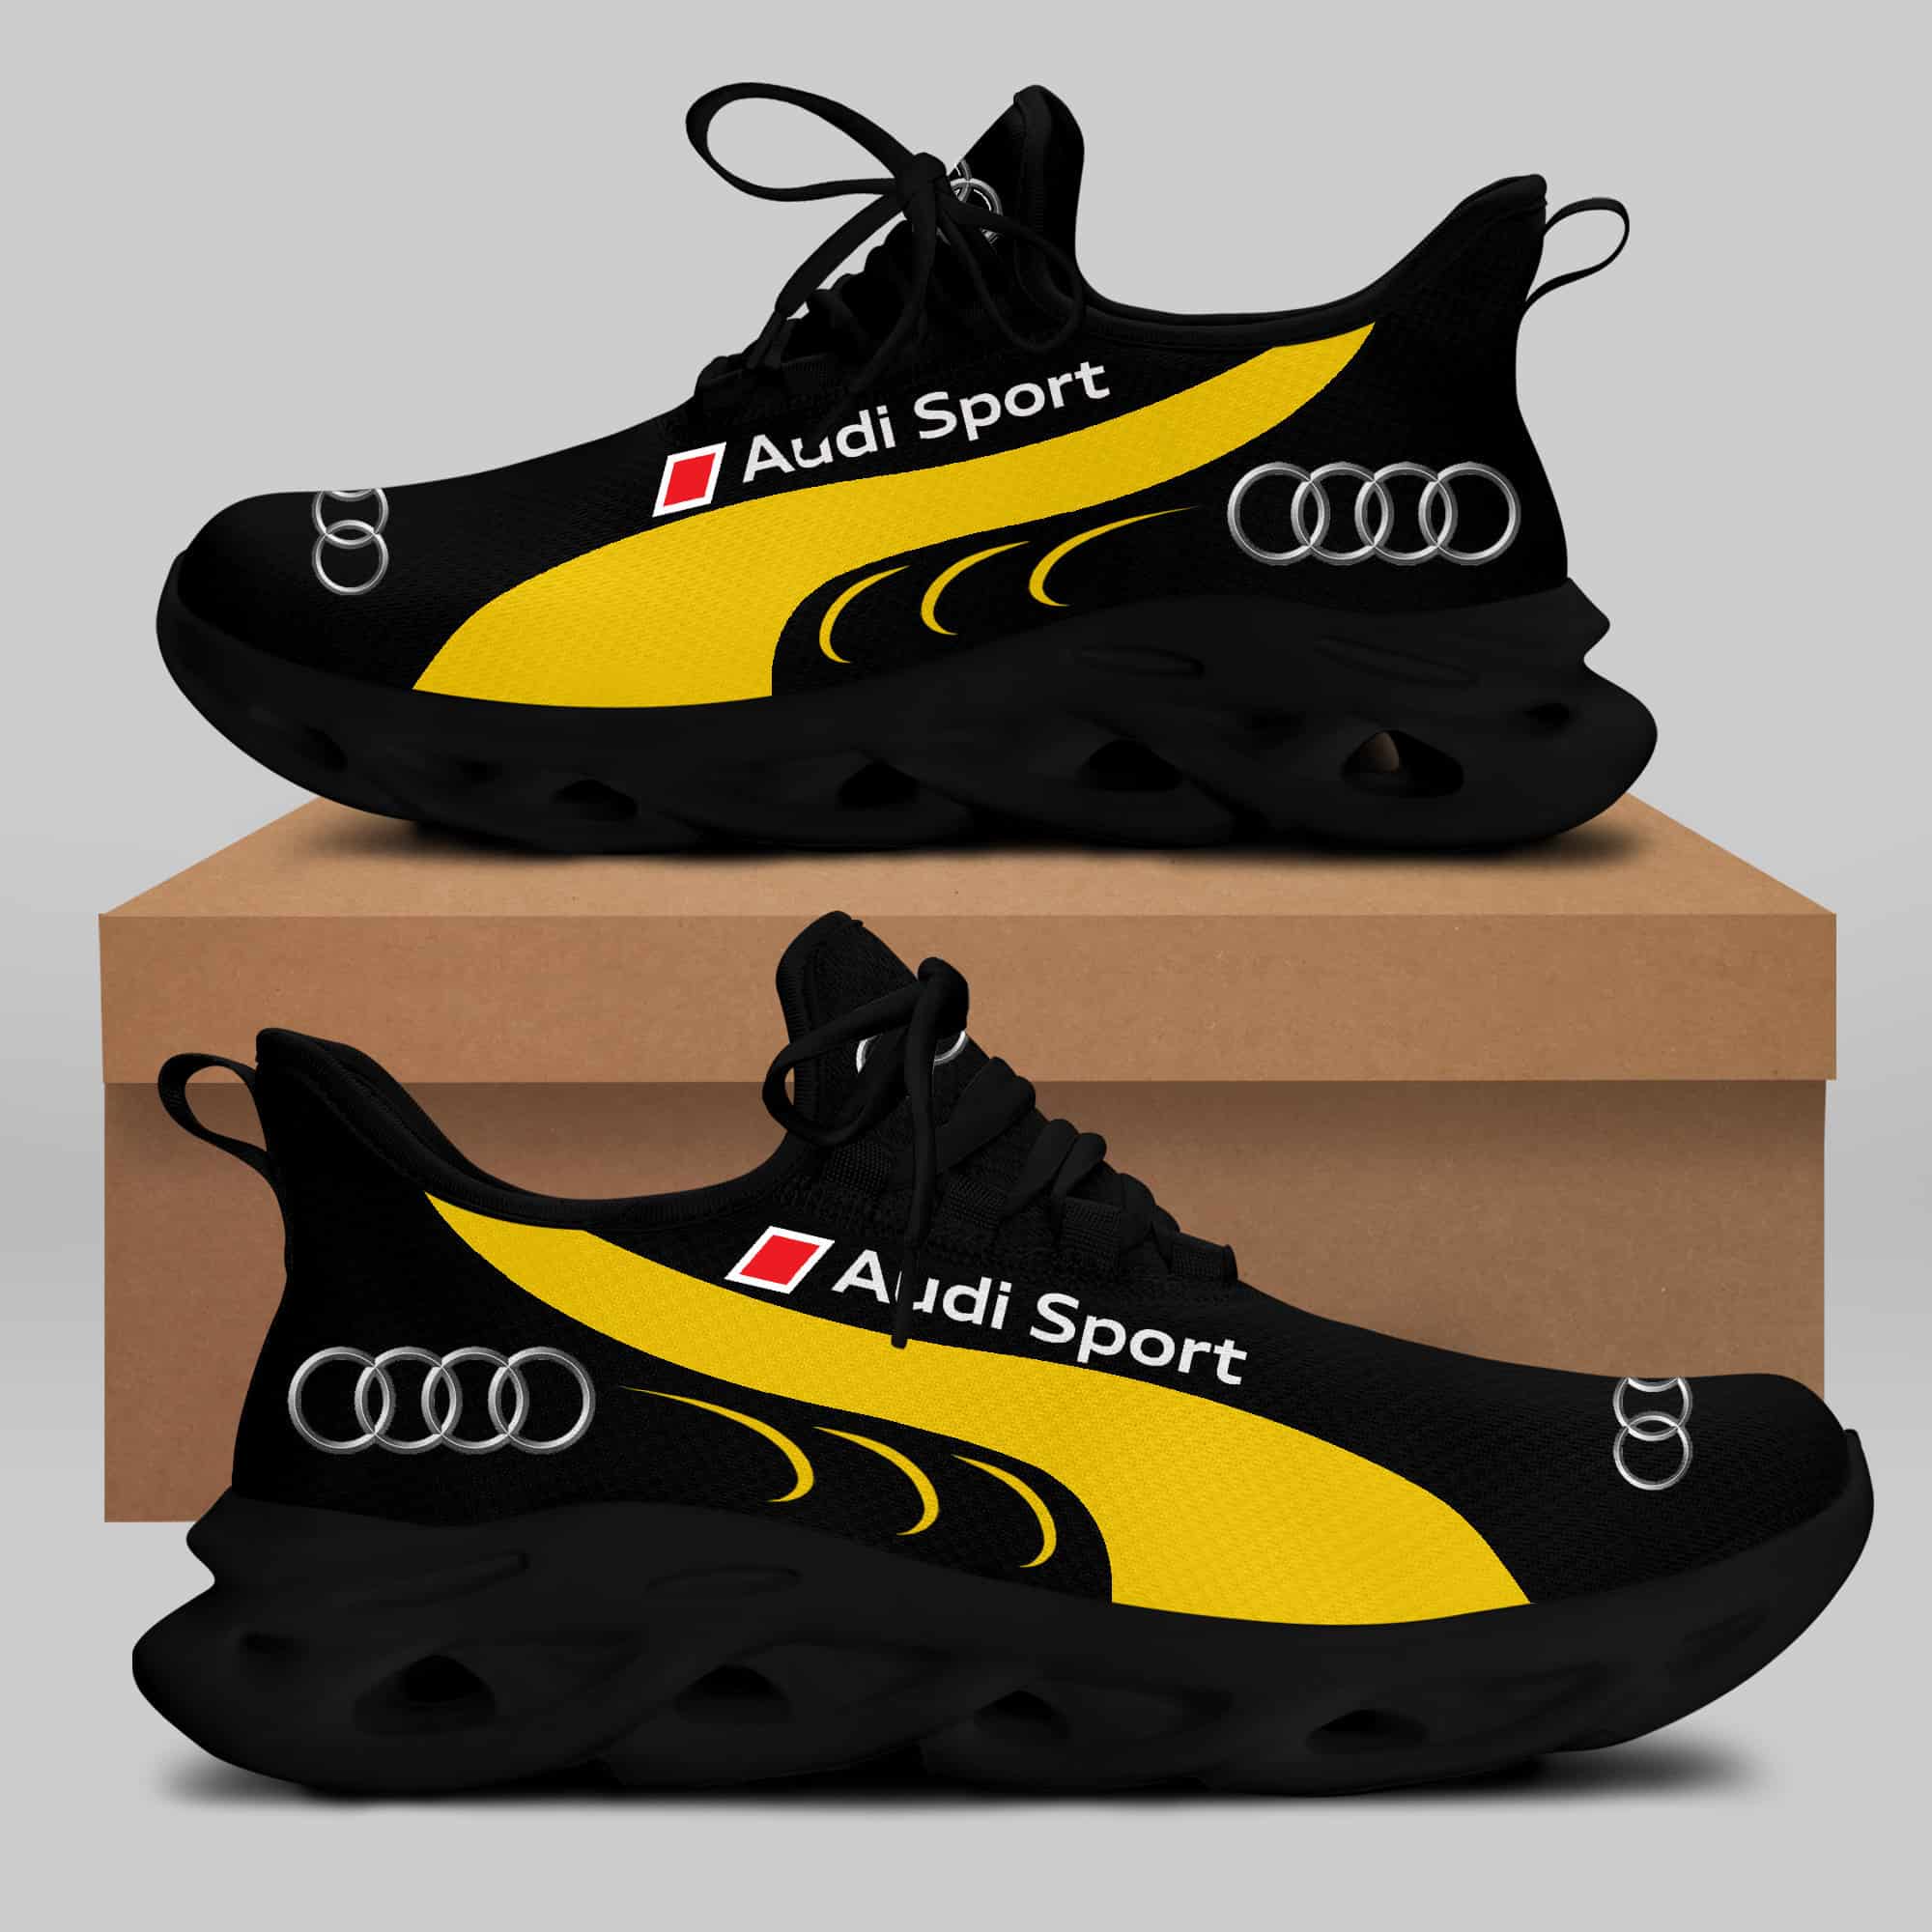 Audi Sport Running Shoes Max Soul Shoes Sneakers Ver 12 1